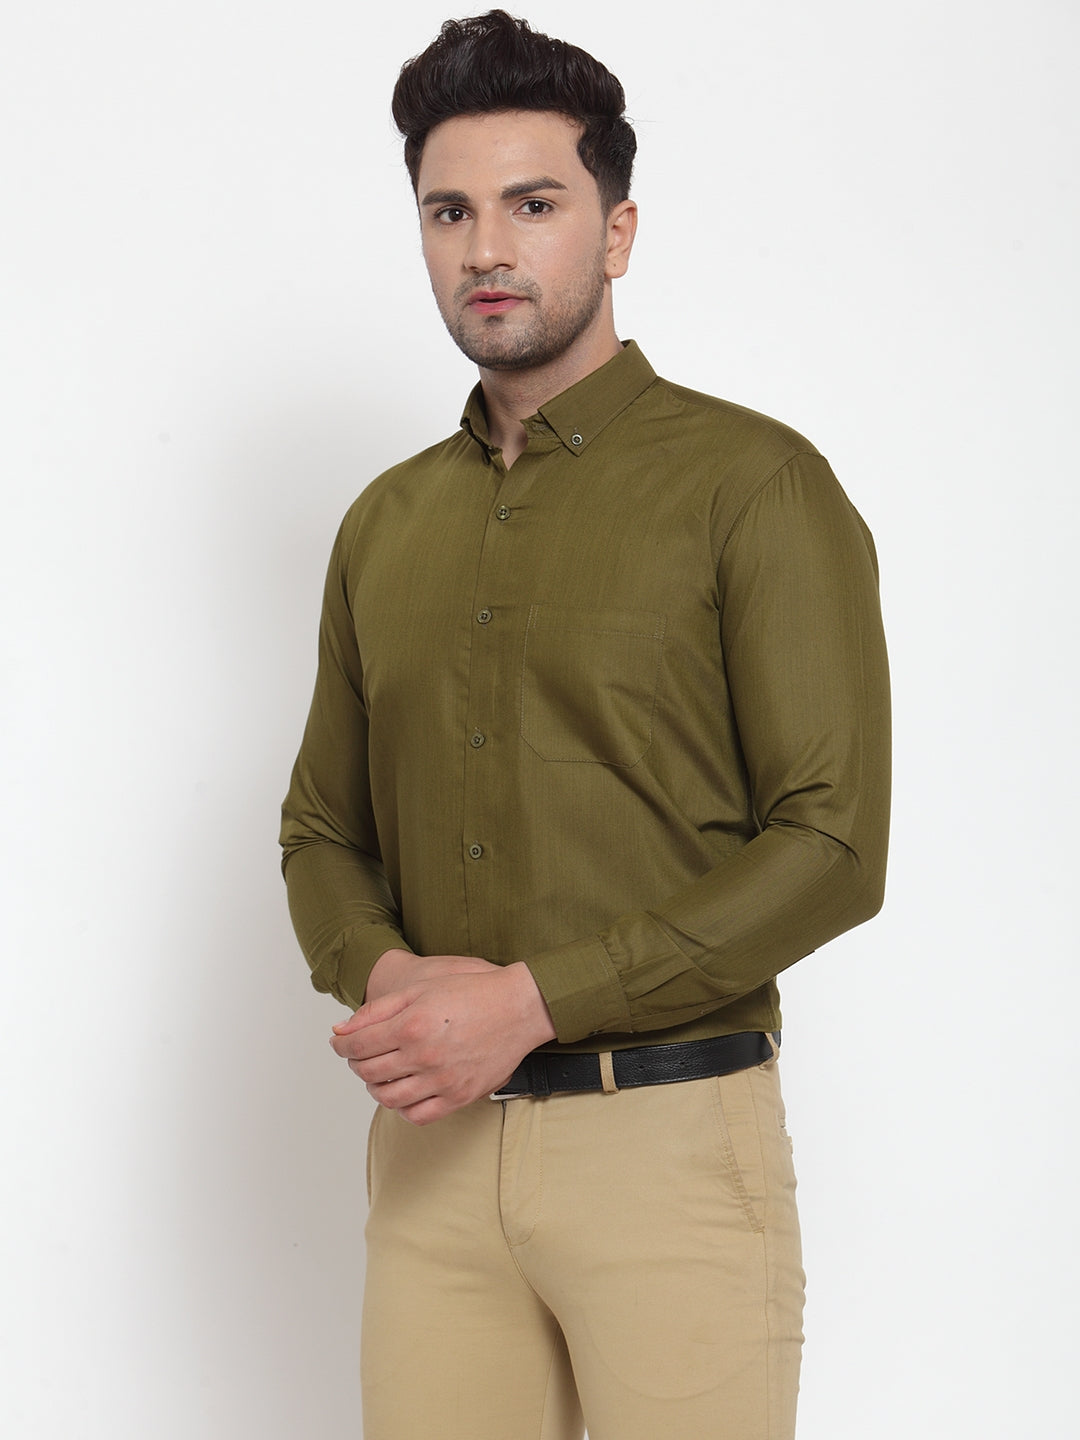 Men's Green Cotton Solid Button Down Formal Shirts ( SF 713Olive ) - Jainish